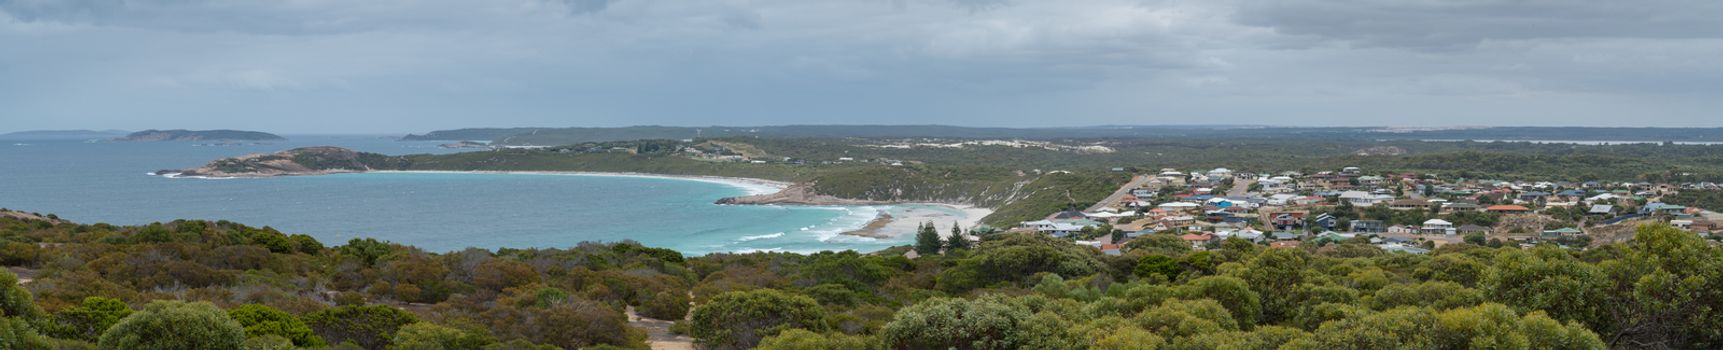 Panoramic view over the West Beach area of Esperance, Western Australia